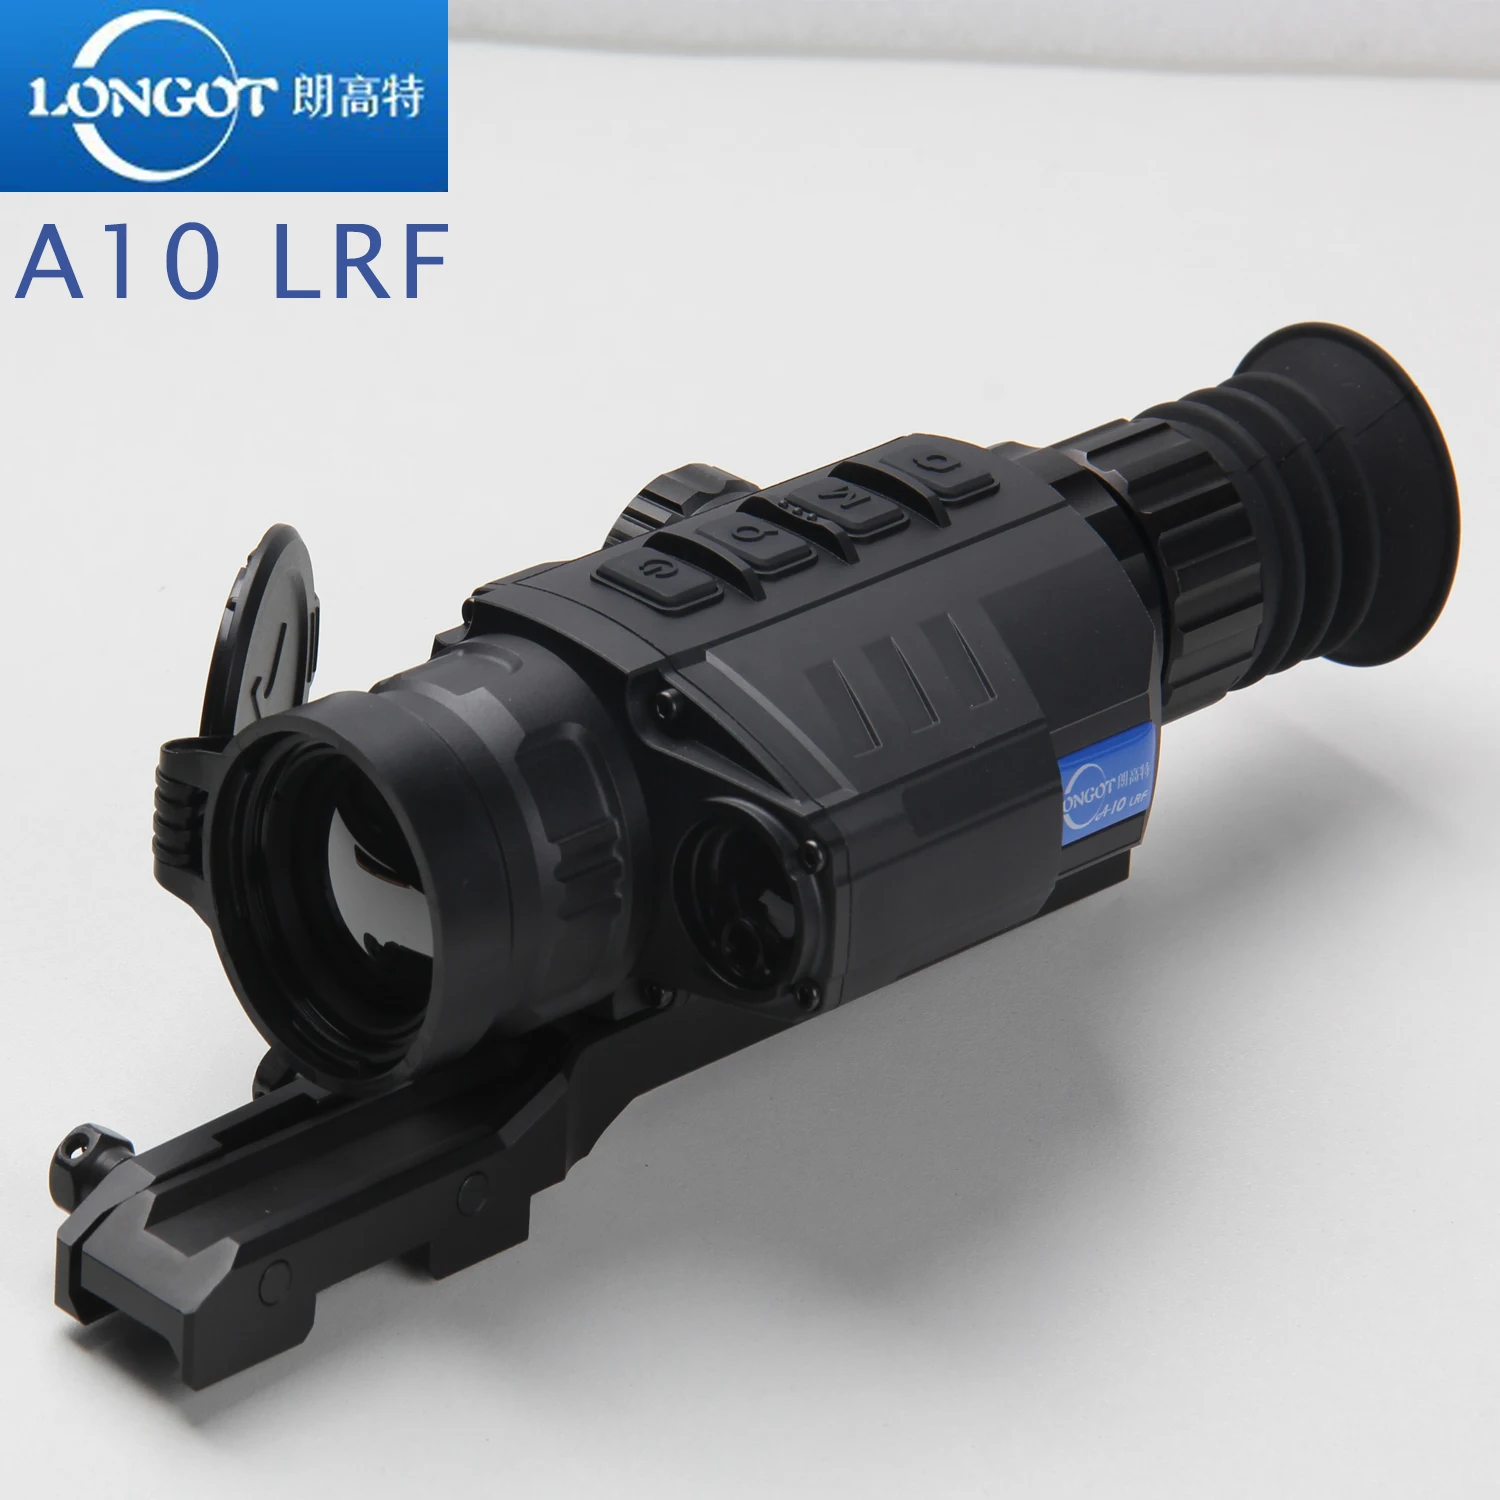 

Longot A10/A10 LRF Muliti-Functional Night Vision Hunting Thermal Riflescope Reticle Night Sight Thermal Imager Night Vision